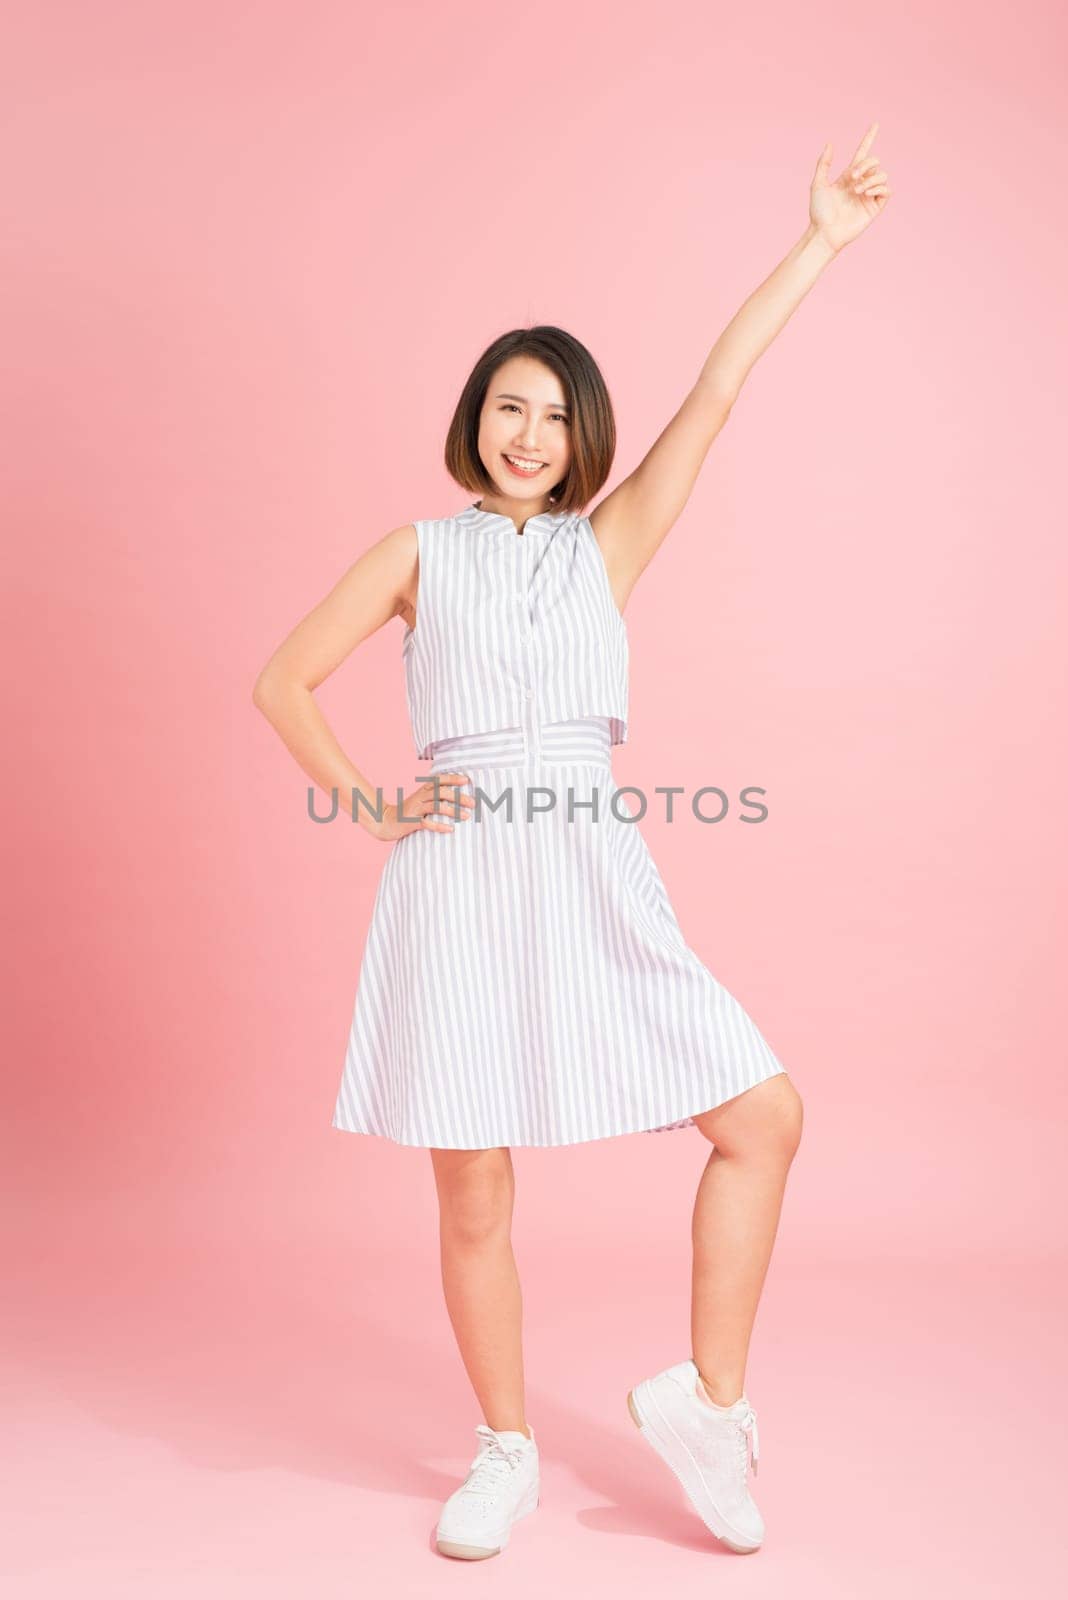 Beautiful young woman in light blue dress dancing on pink background